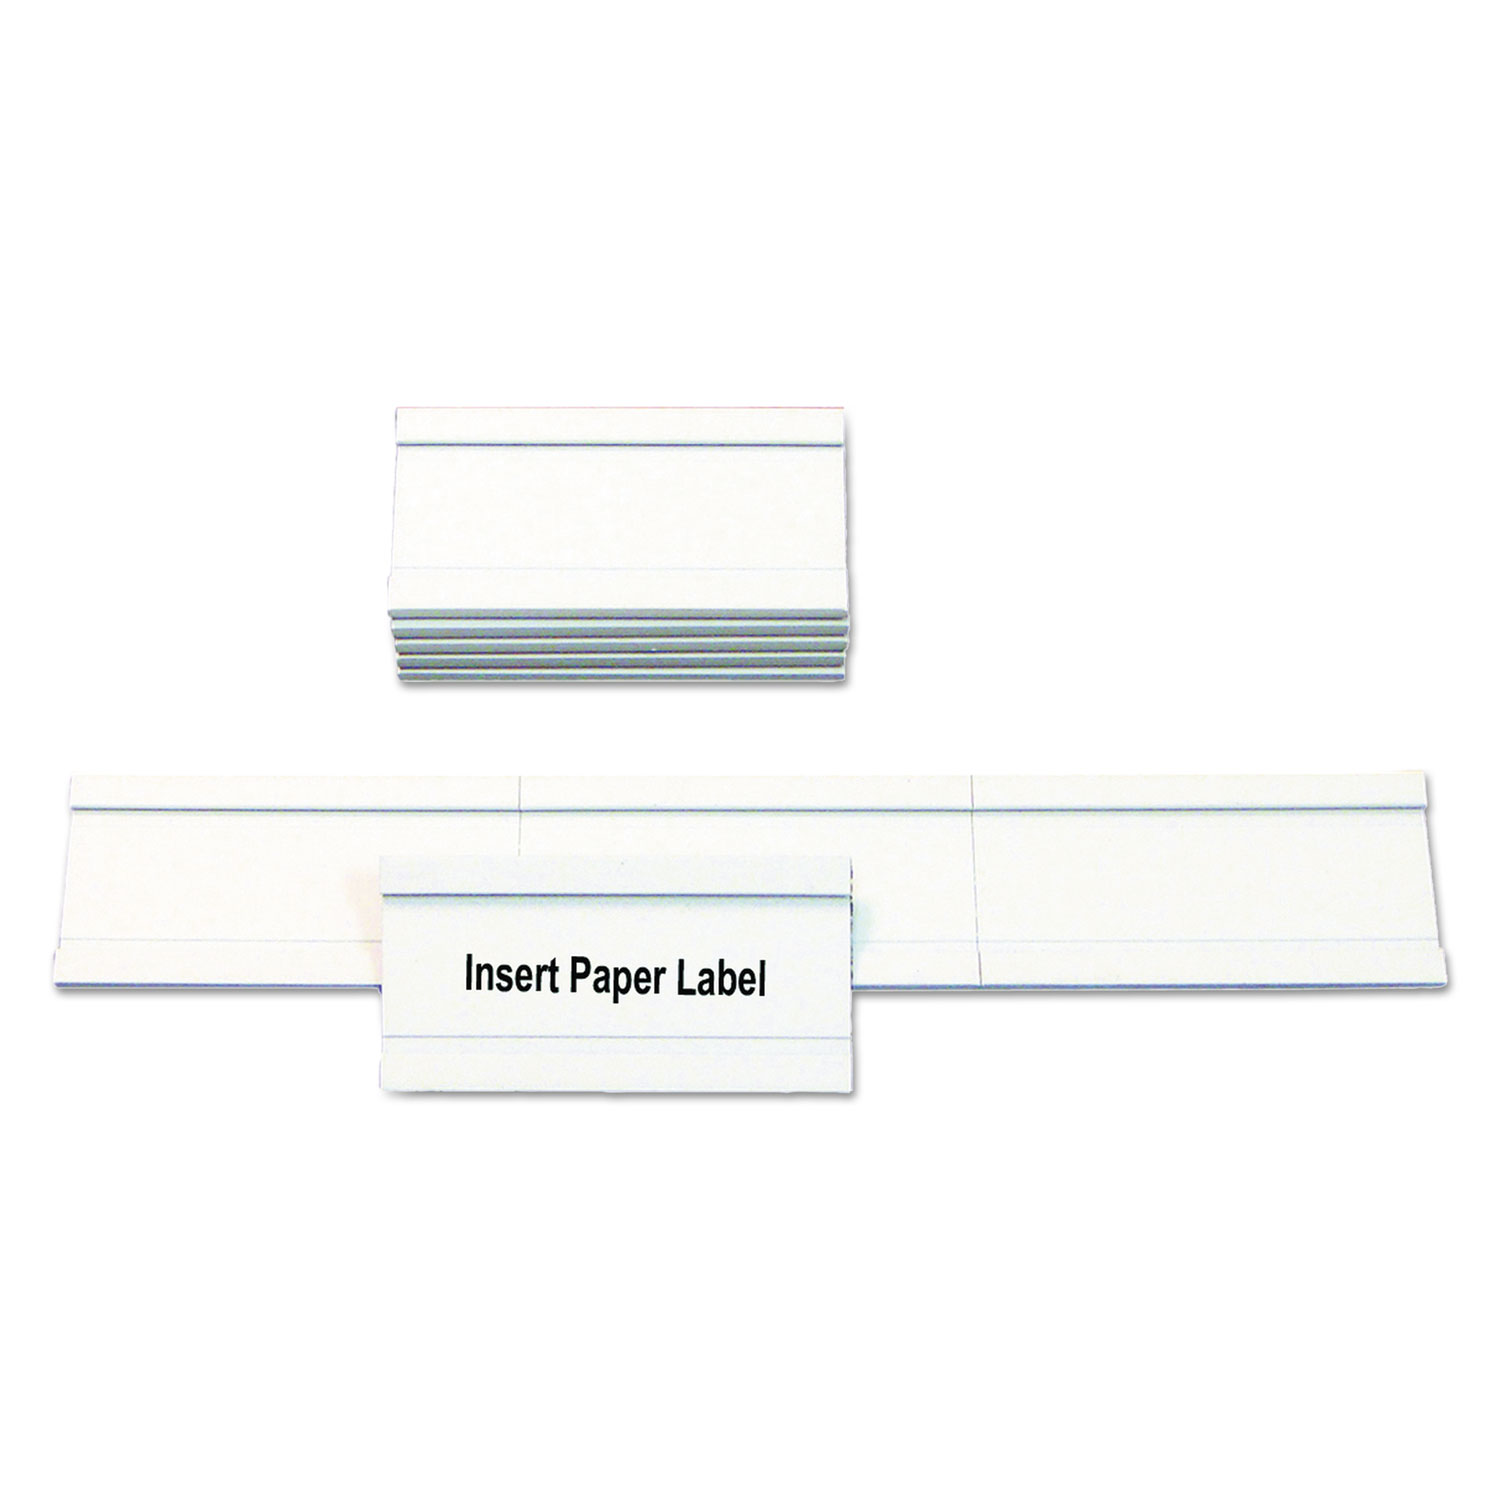  MasterVision FM1325 Magnetic Card Holders, 2w x 1h, White, 25/Pack (BVCFM1325) 